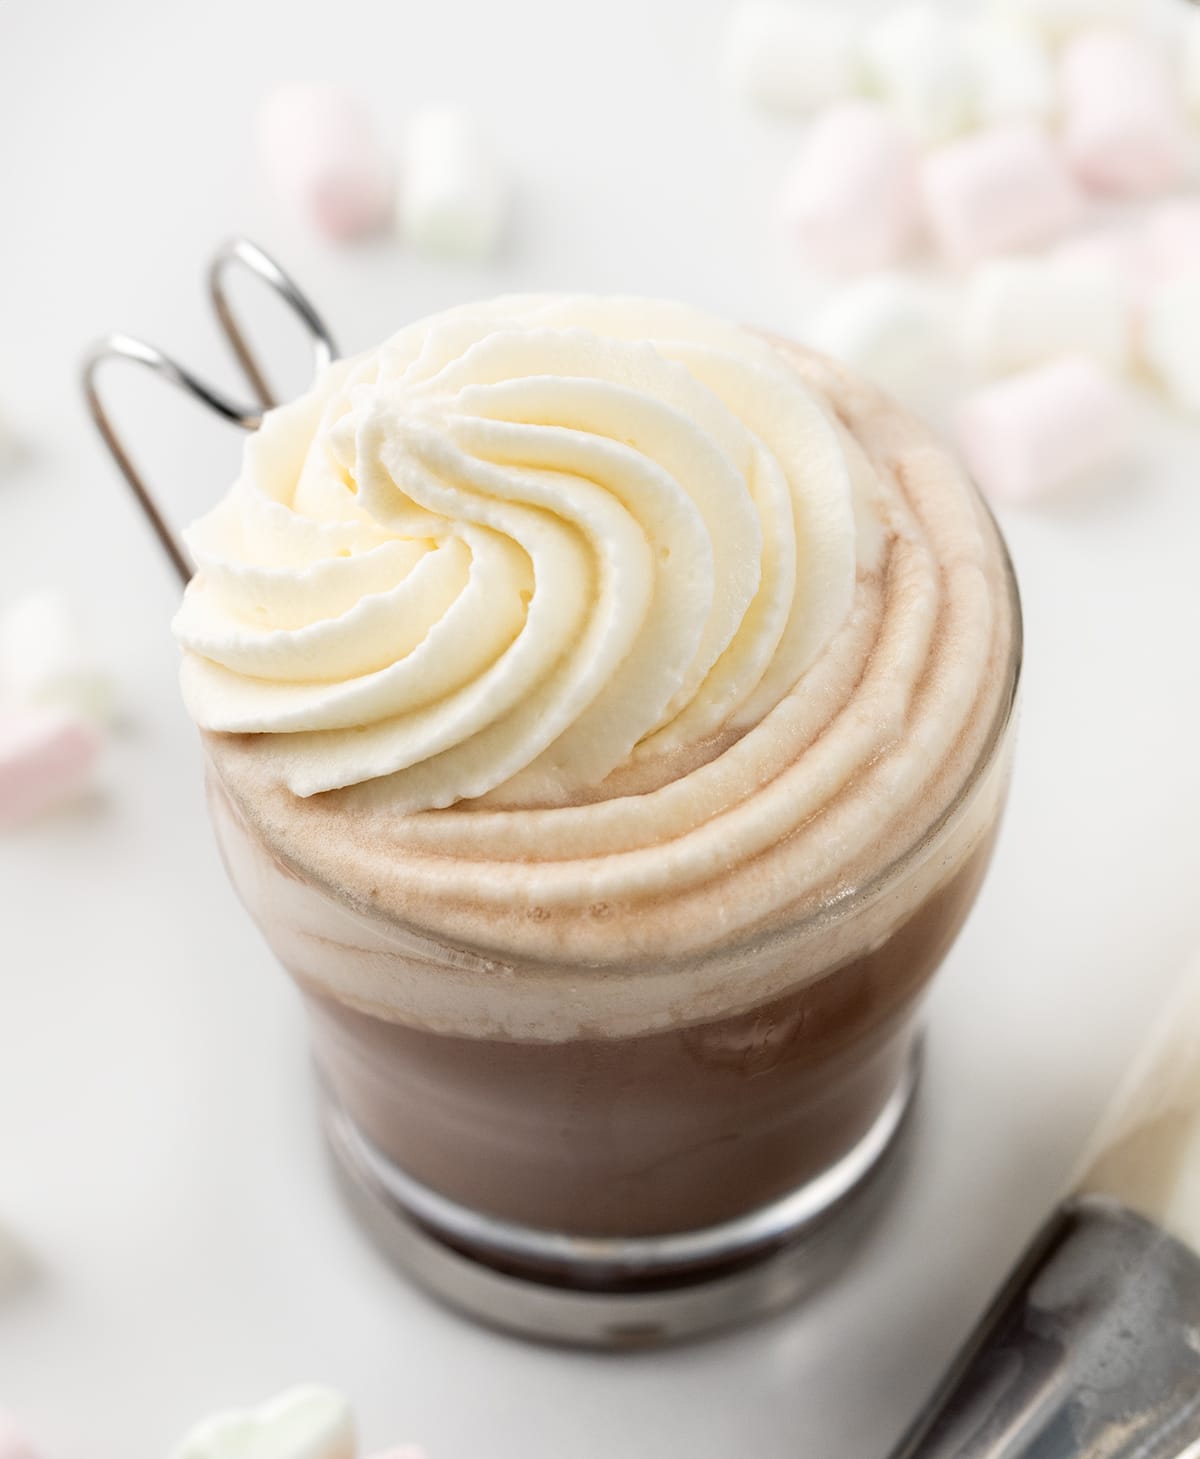 Cup of Hot Cocoa with Marshmallow Whipped Cream.